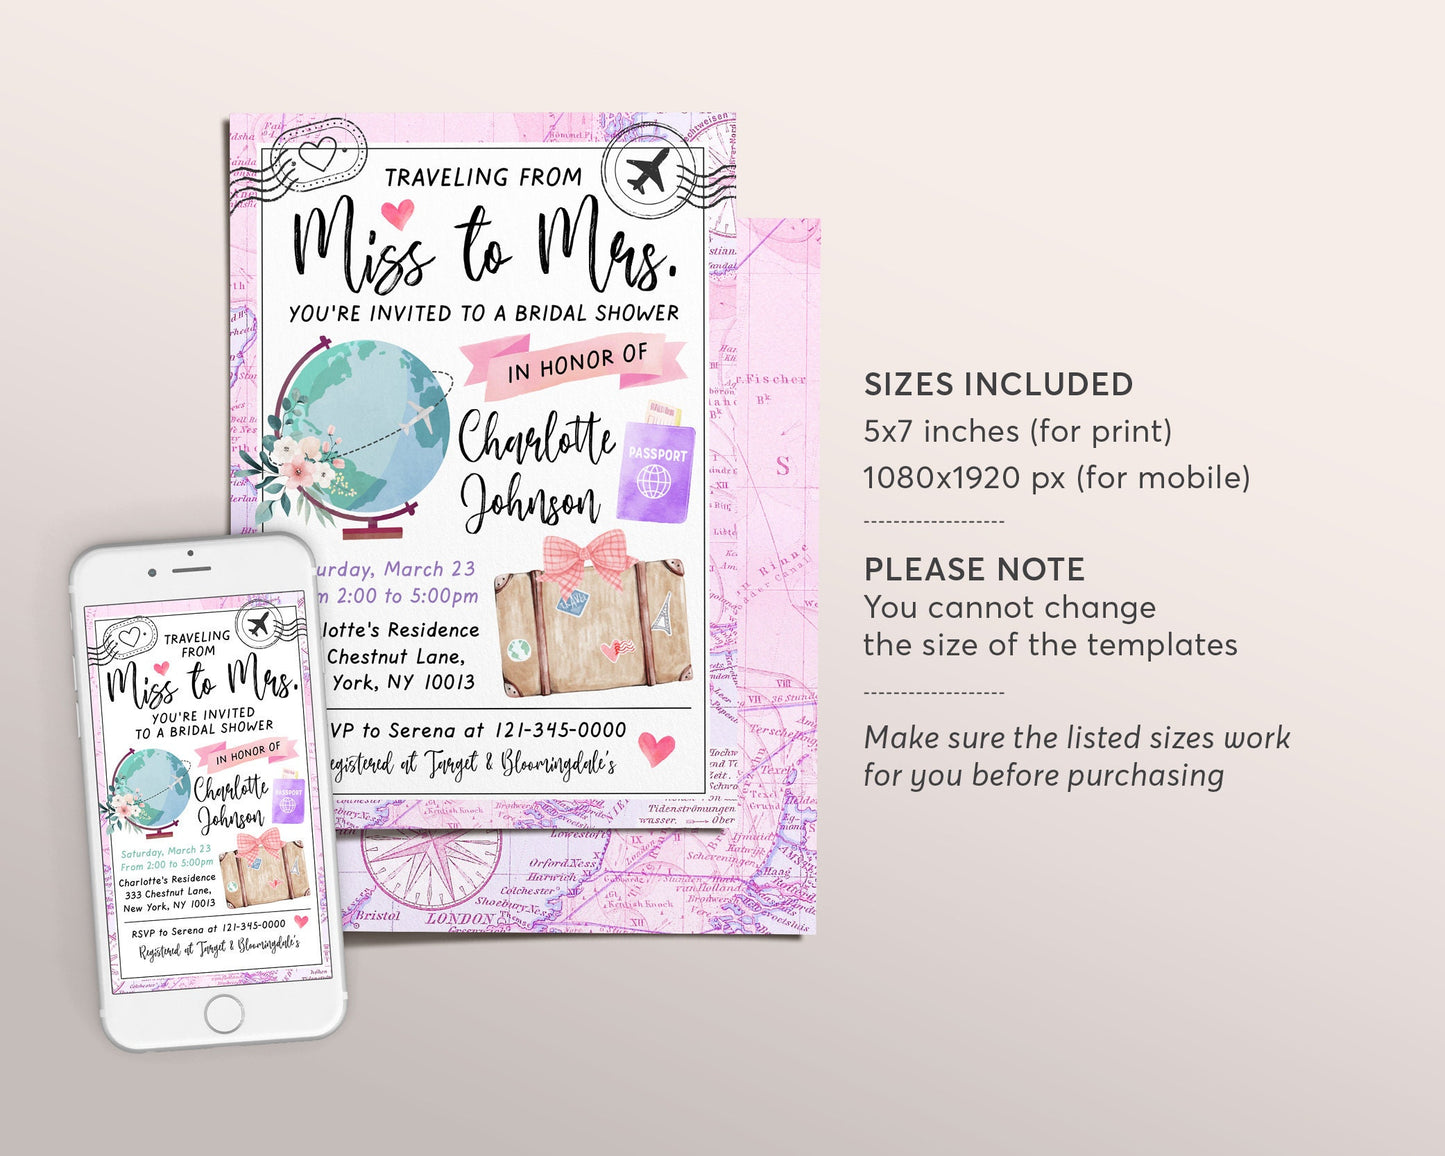 Traveling from Miss to Mrs Invitation Editable Template, Travel Pink Floral Bridal Shower Invite Printable, Vintage World Map Globe Passport